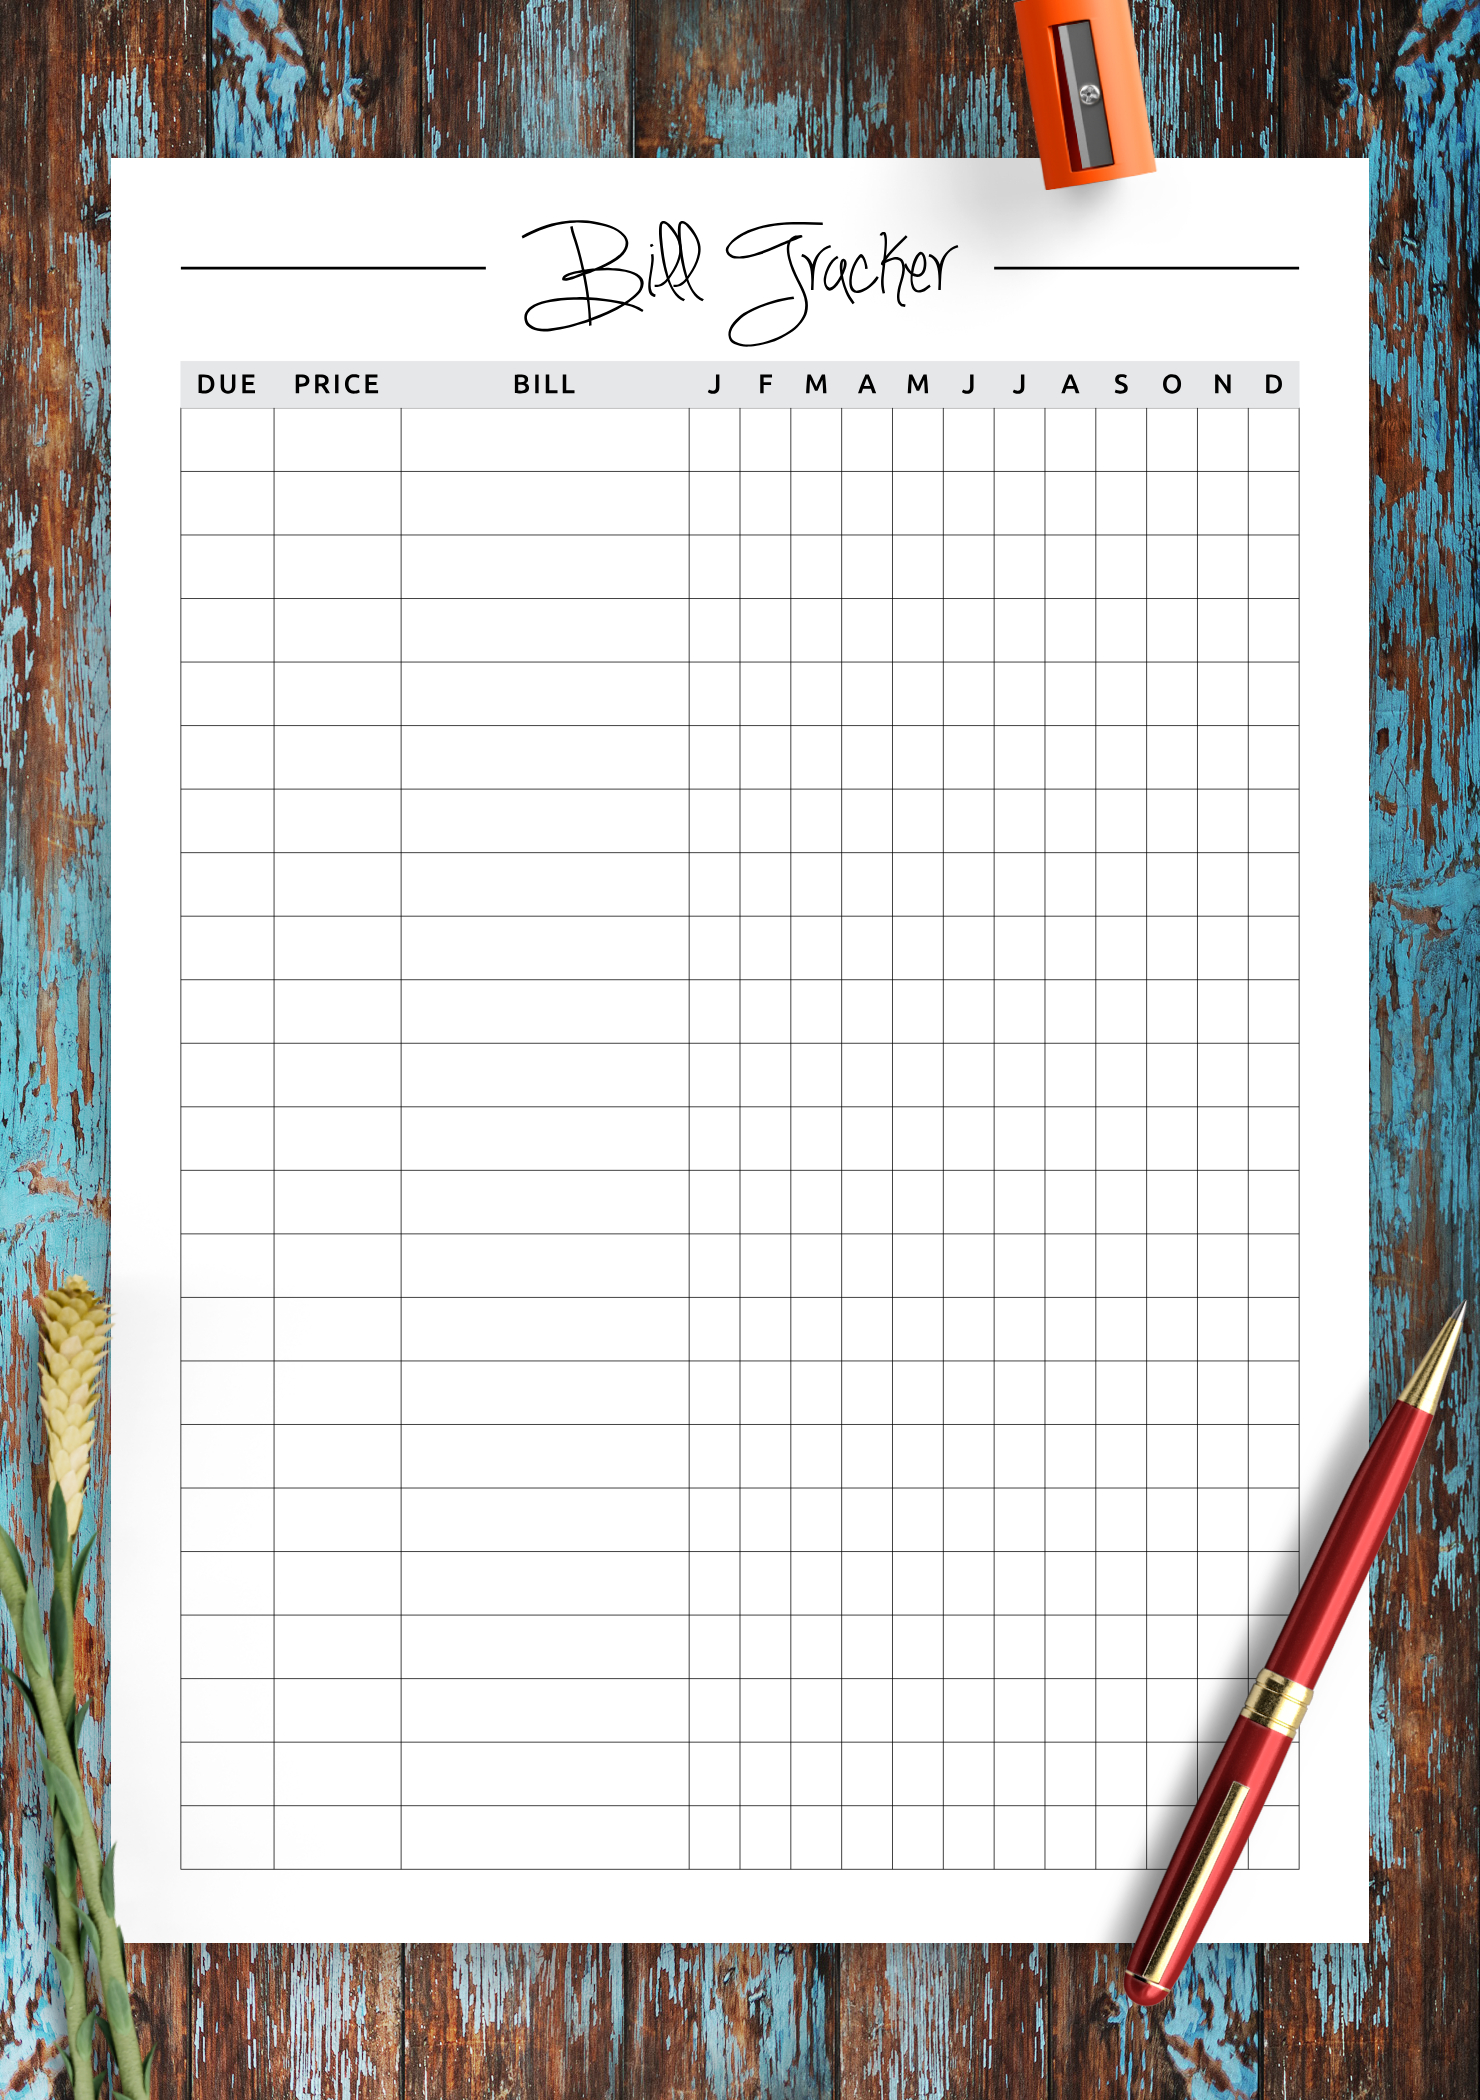 Download Printable Square Grid Monthly Bill Tracker Pdf inside Free Printable Monthly Bill Organizer Template